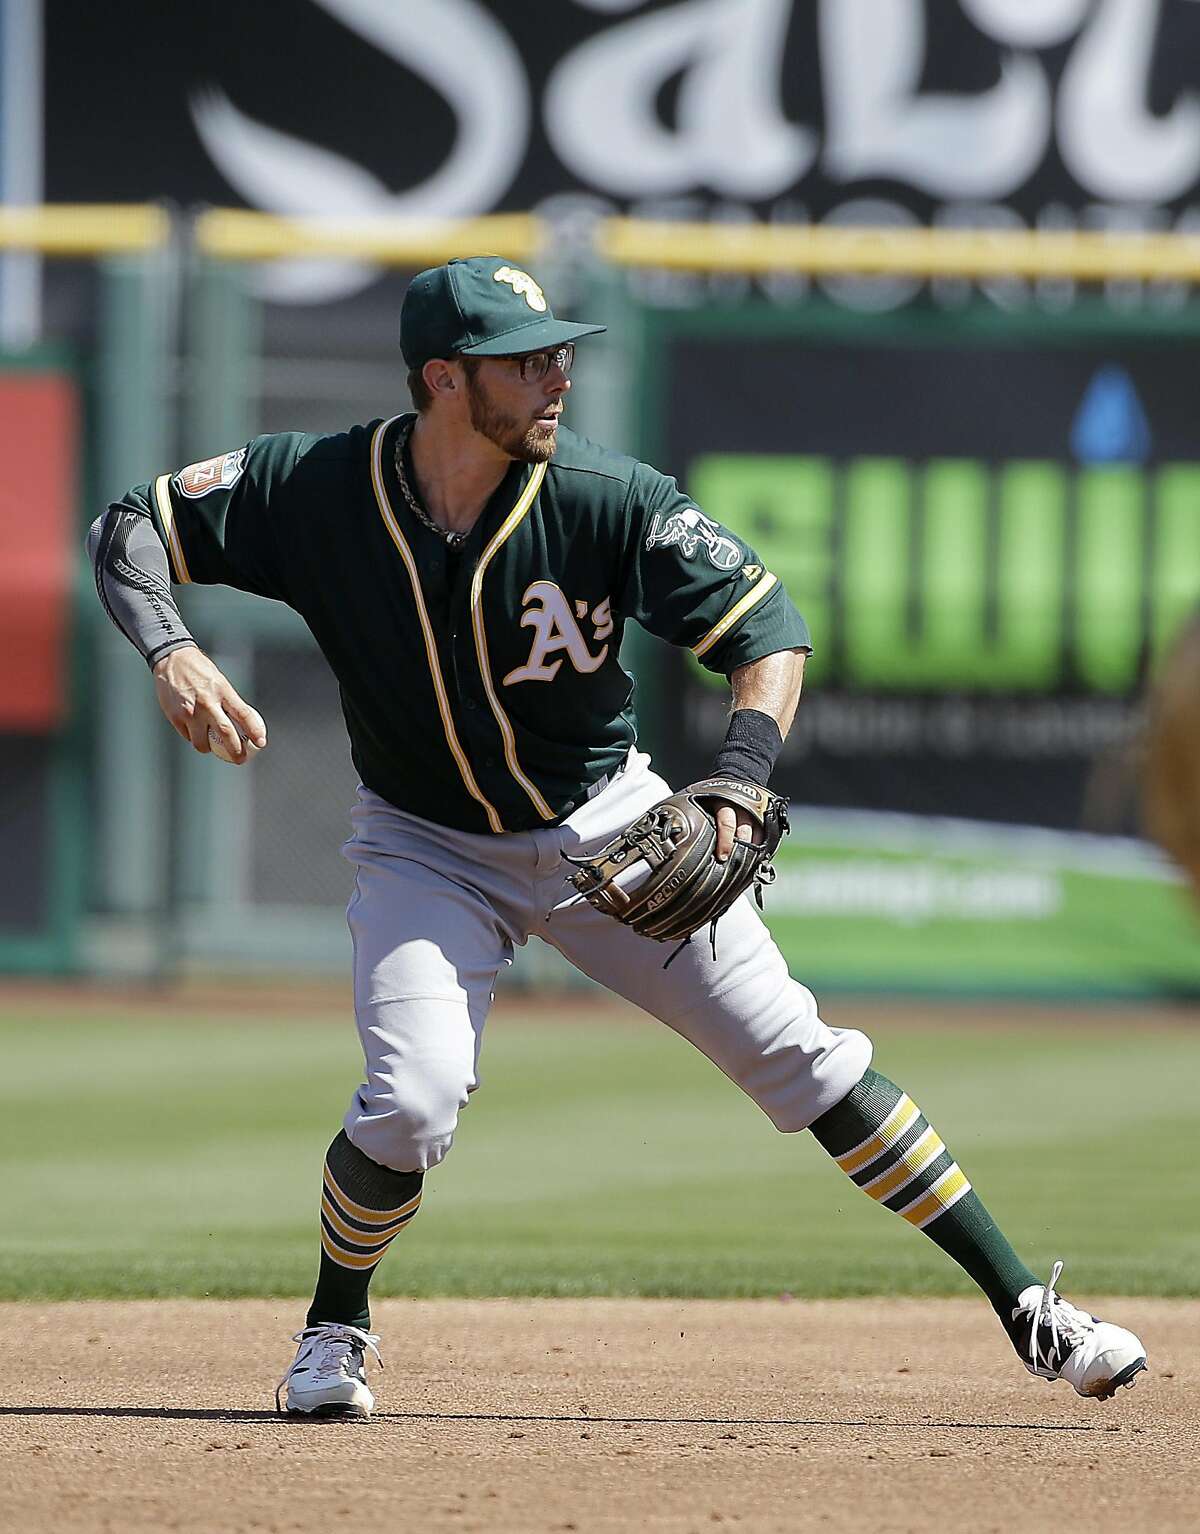 Oakland Athletics second baseman Eric Sogard against the San Francisco Giants during a spring training baseball game in Scottsdale, Ariz., Monday, March 21, 2016. (AP Photo/Jeff Chiu)